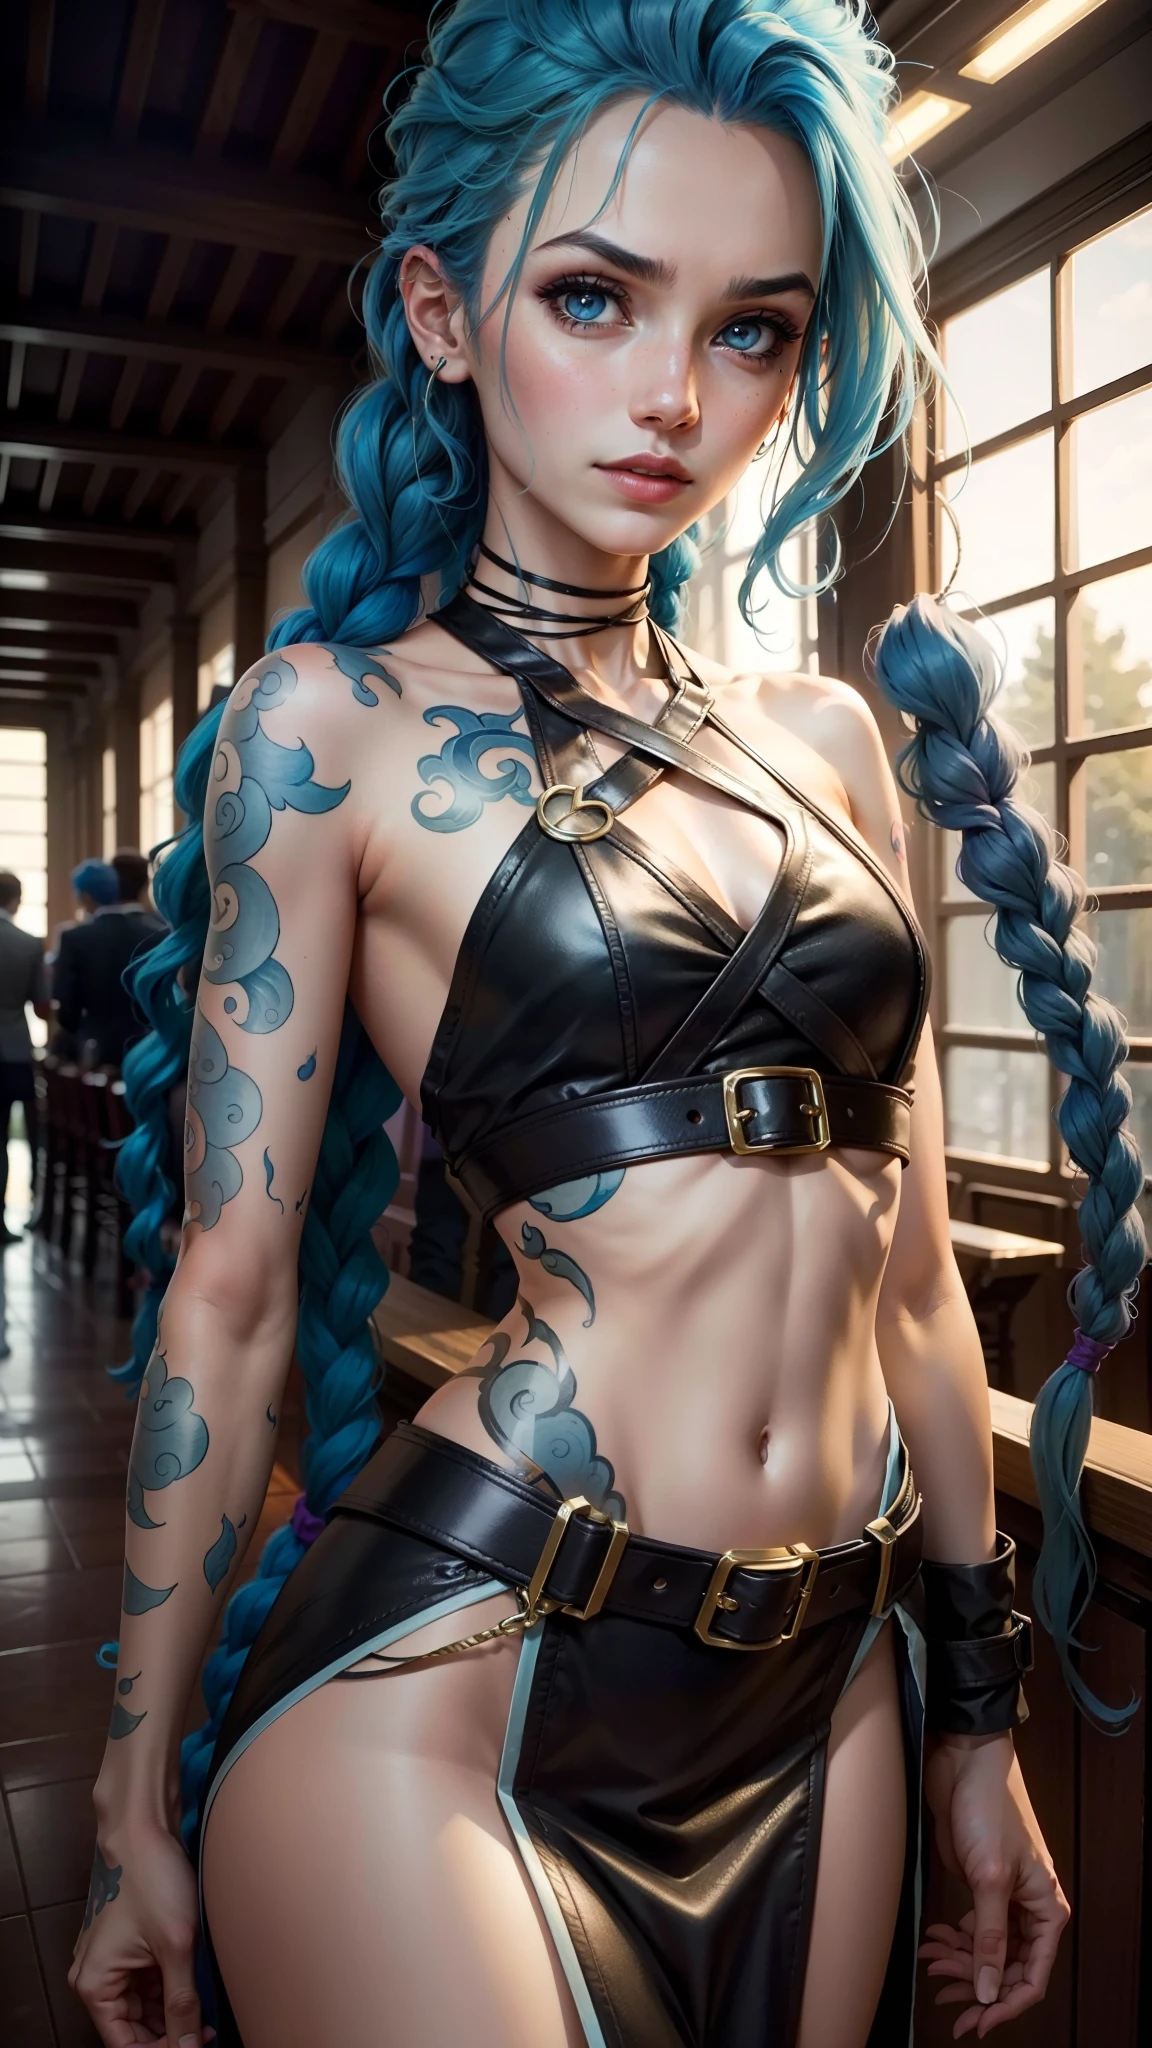 Half realistic， 2.5D， A detailed， Flat color only， illustratio， line art， aquarelle：0.8， best qualtiy， detailedbackground， Close-up of 18yo 1girl's head and shoulders，Jinx role-playing，exteriors， light blue  hair，Double up braid，Tattooed with，Event Pass， In the conference center for cosplay events， Sideslit，dramatic  lighting，dark deep shadows，